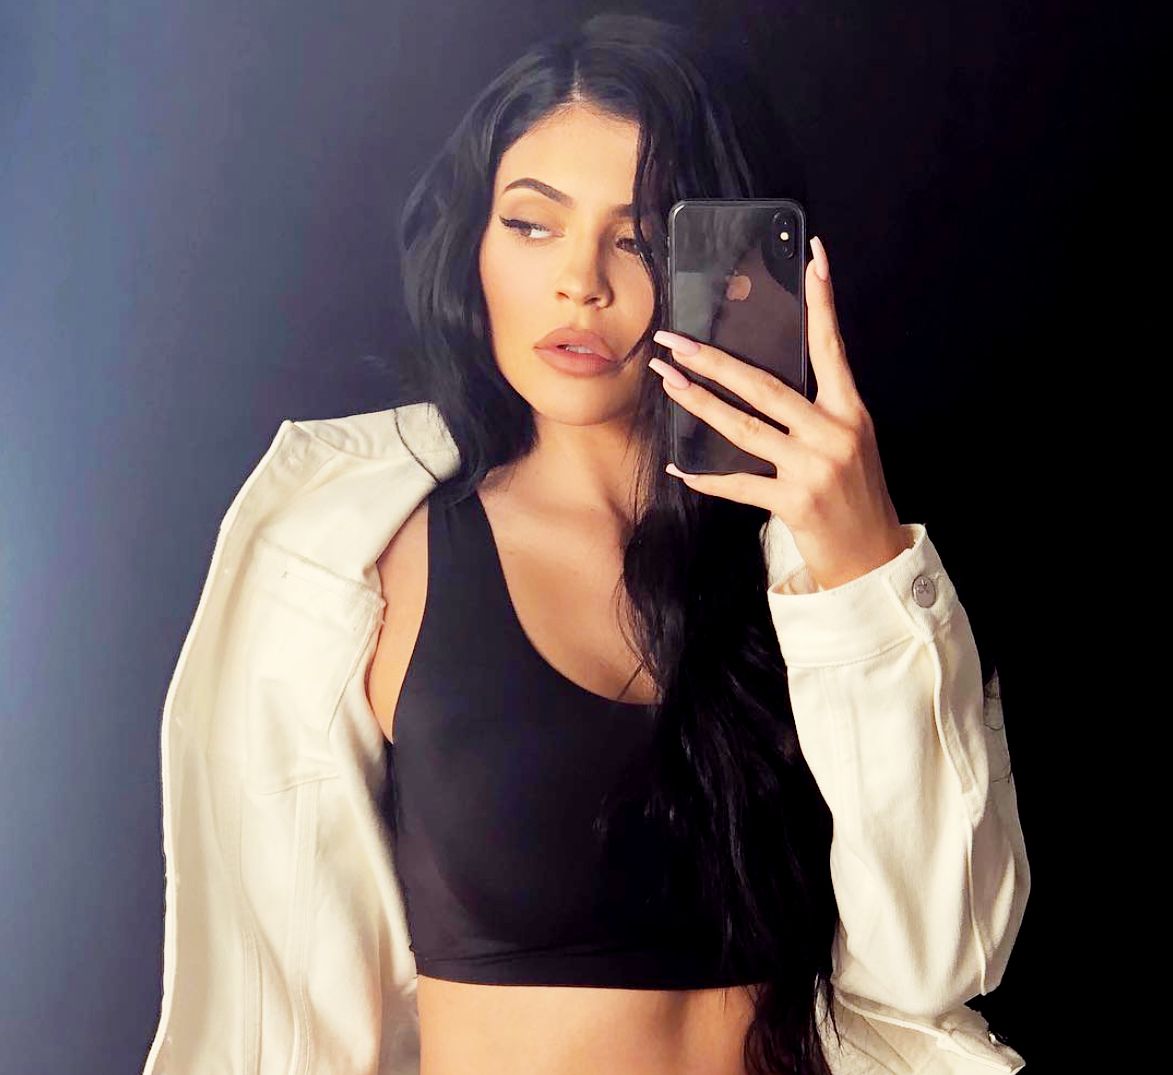 Kylie Jenner Shares 'Cute Day' and TikTok Game with Sister Kendall